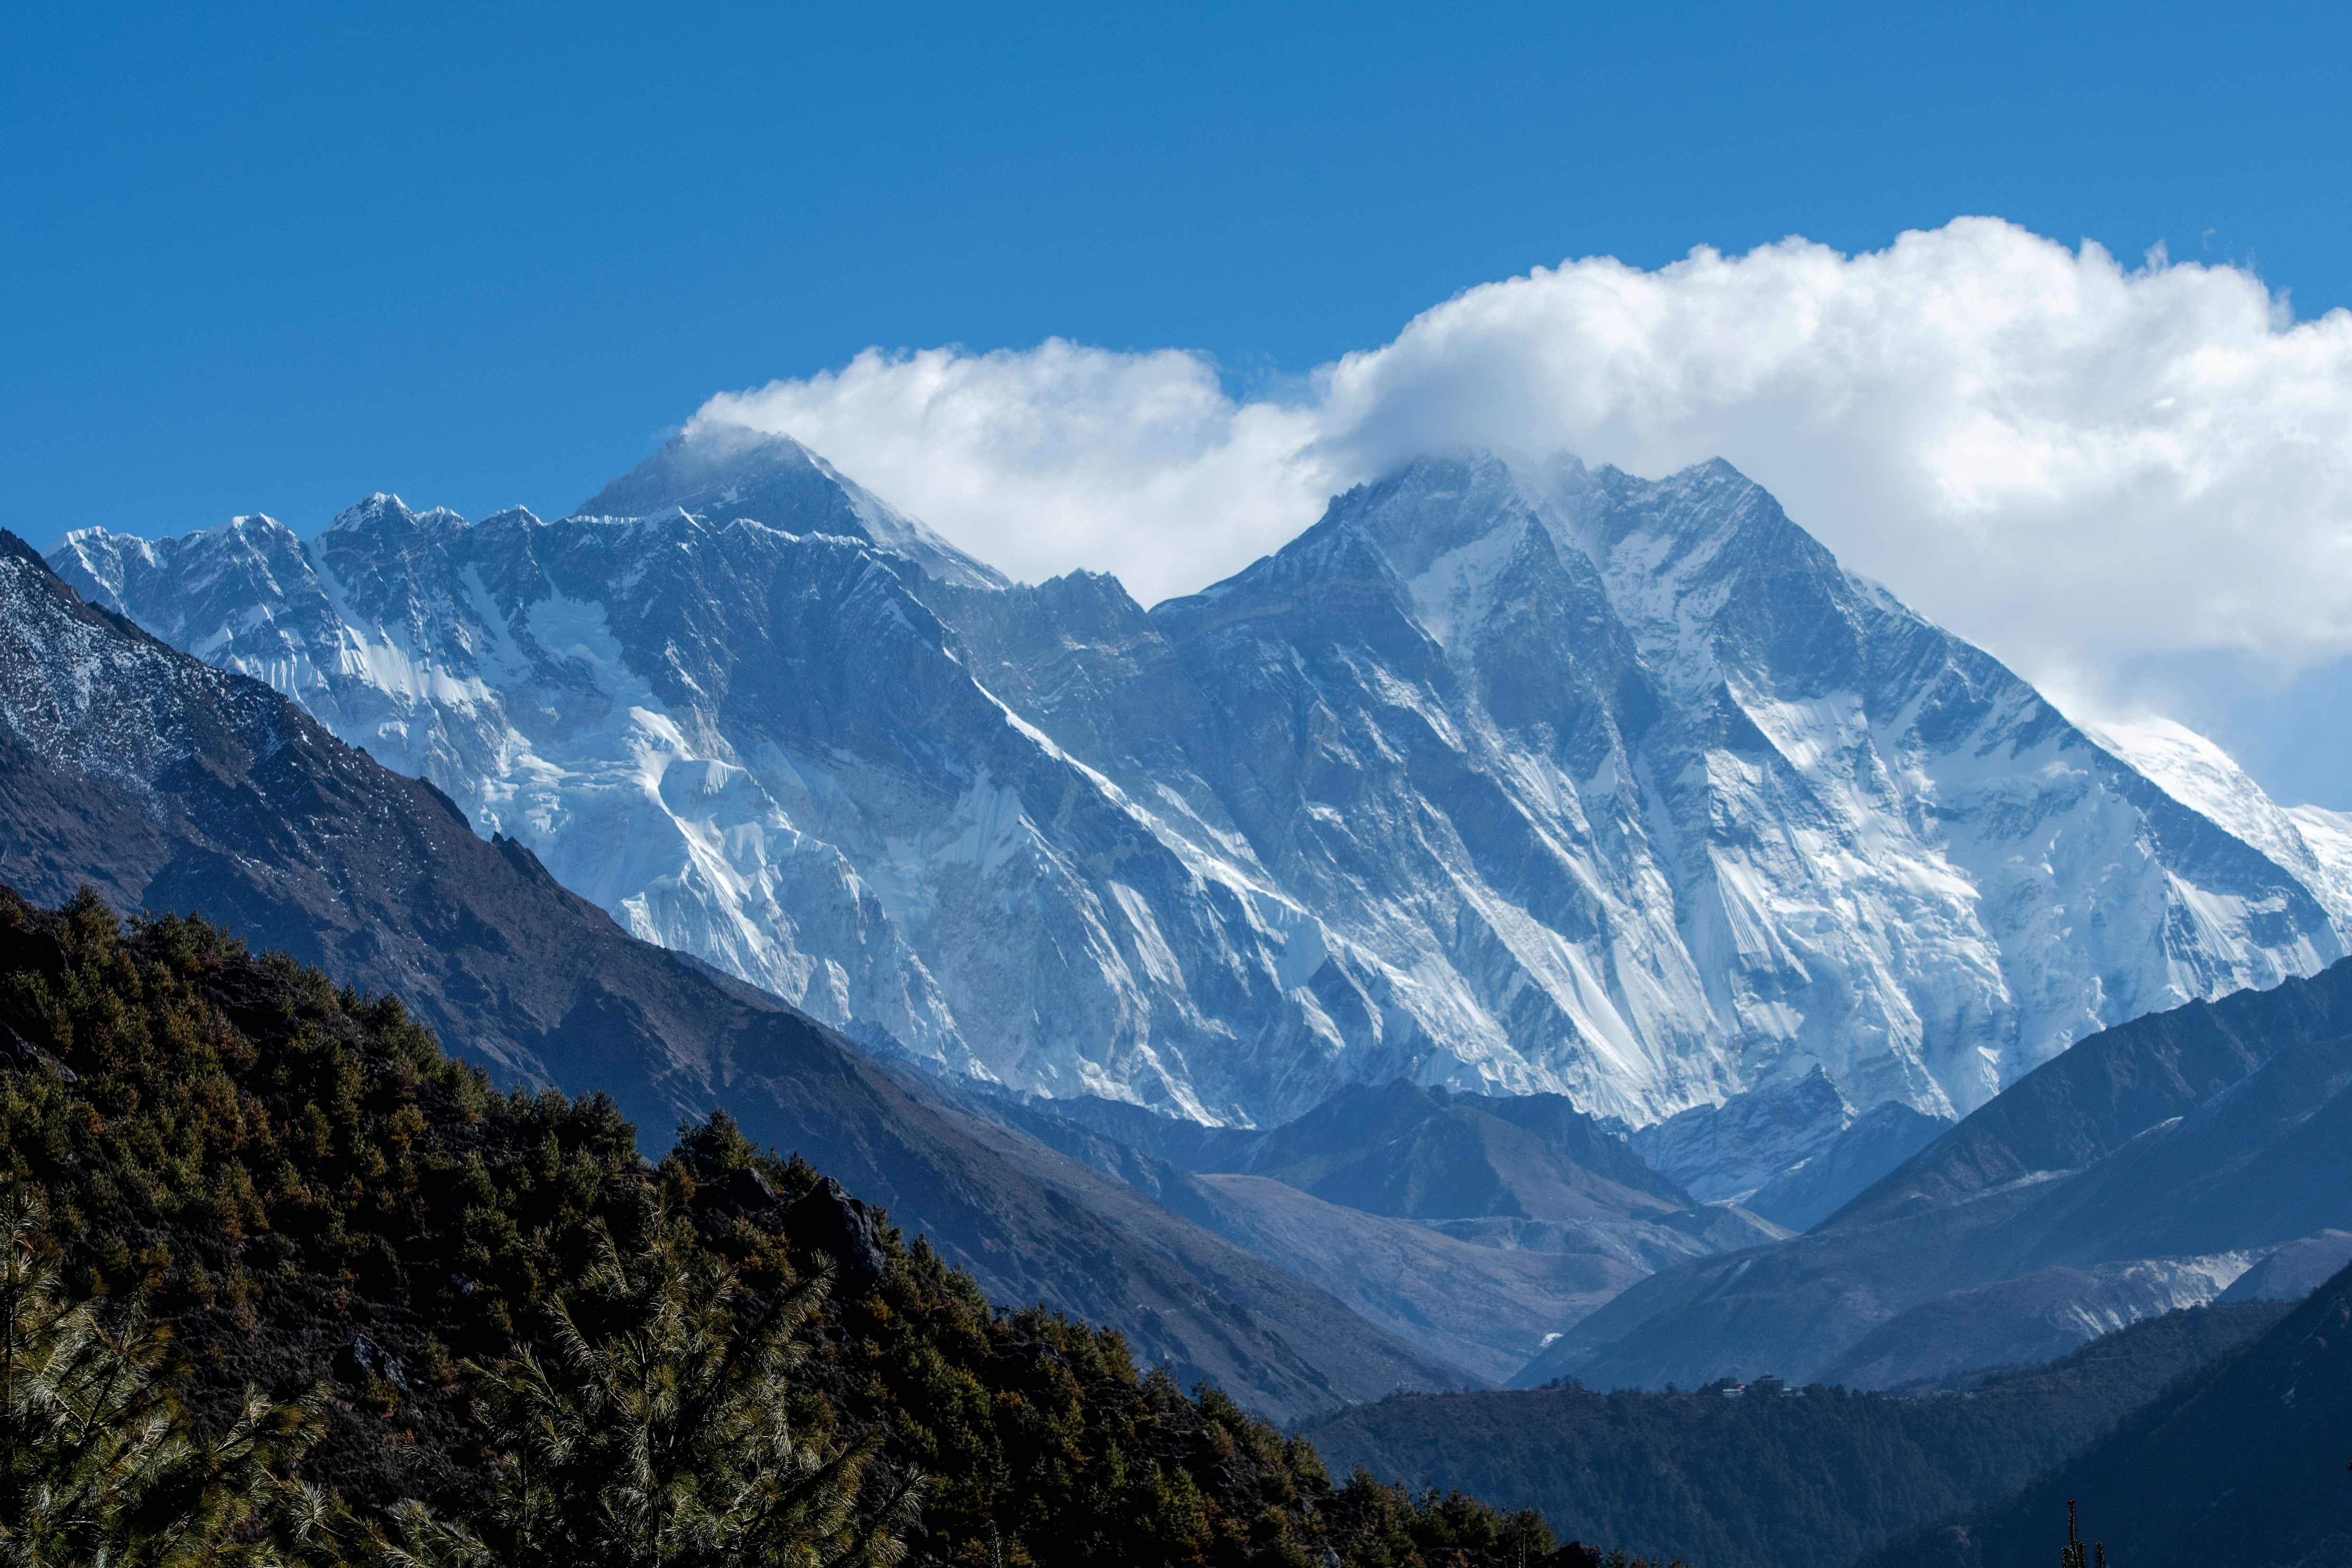 The highest point on Earth got a bit higher as China and Nepal finally agreed on a precise elevation for Mount Everest after decades of debate